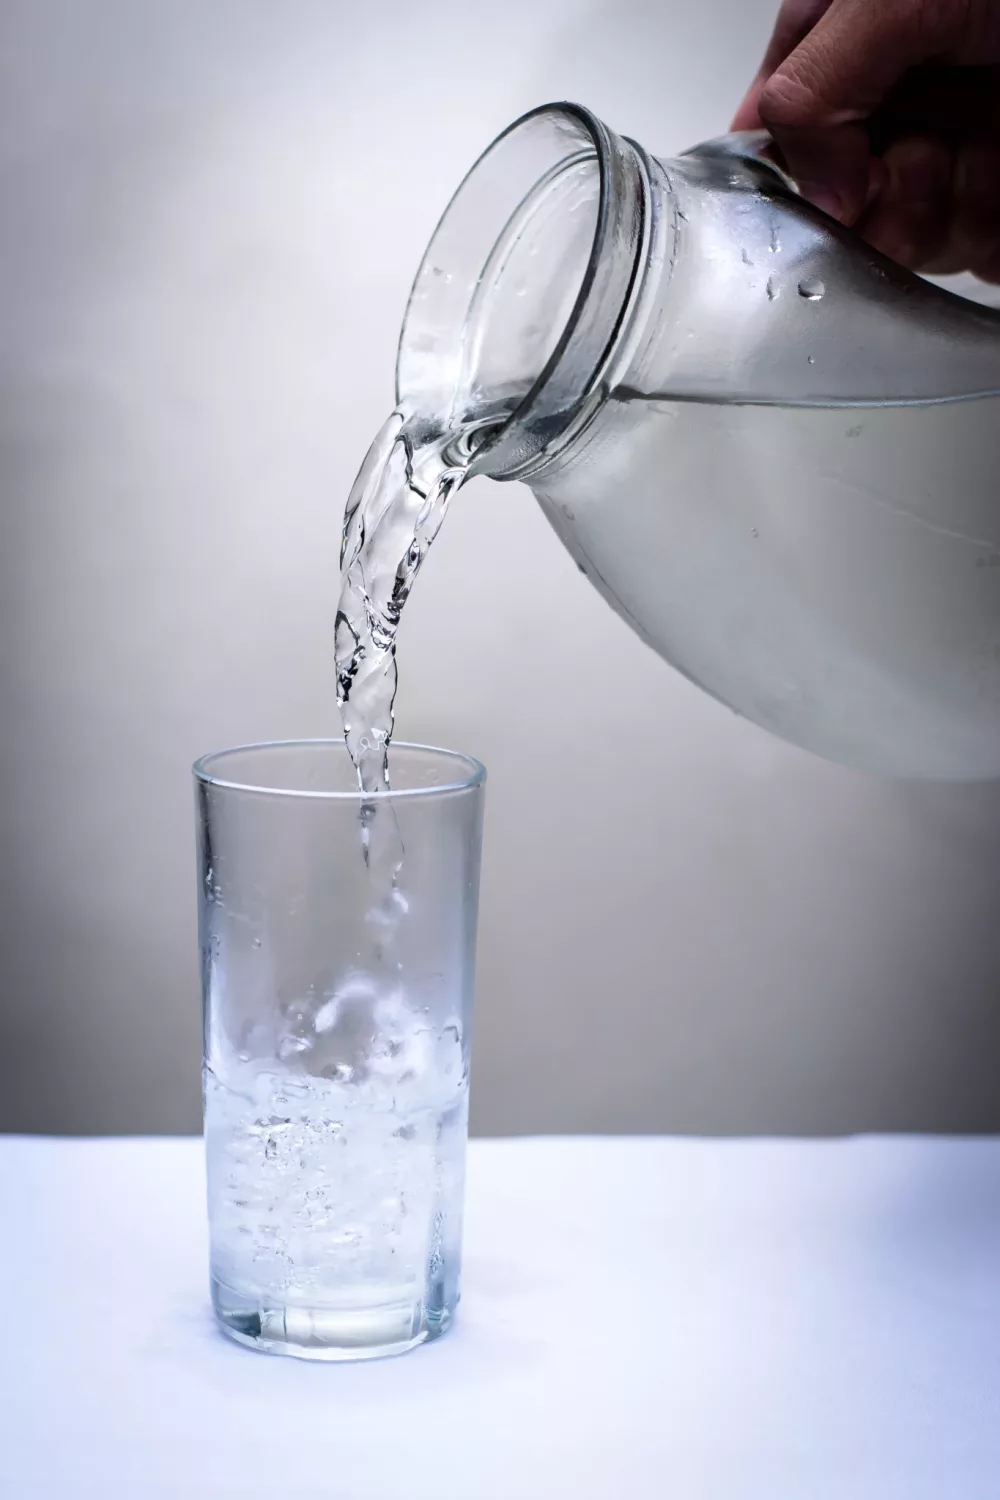 glass of water being poured from a glass pitcher